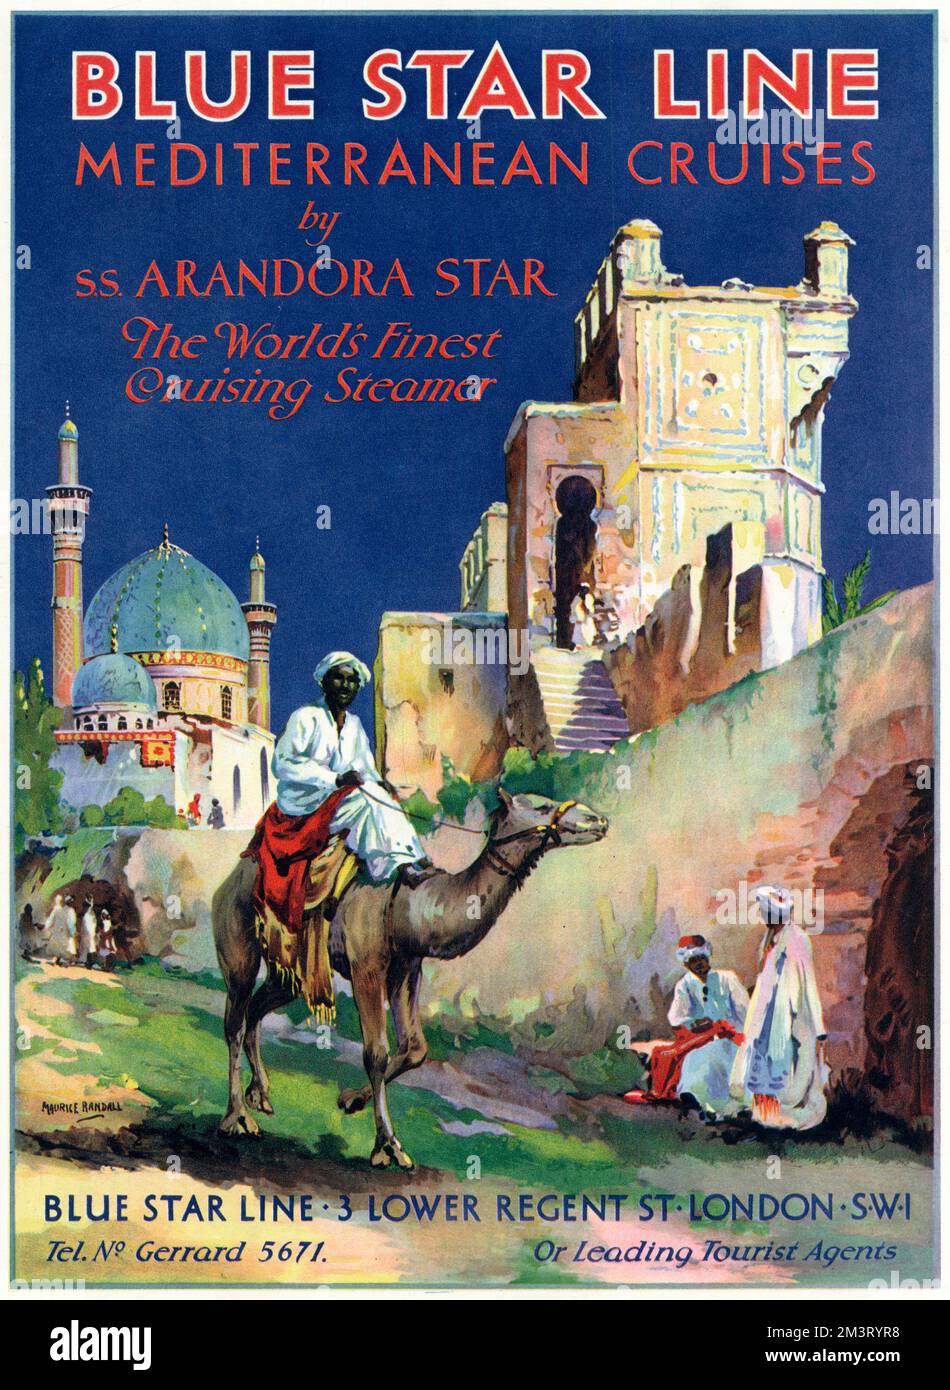 Advertisement for Blue Star Line's Mediterranean cruises on board the S.S. Arandora Star. The Arandora Star was requisitioned as a troop ship during the Second World War, and was sunk by a German torpedo when it was carrying Italian and German internees and POWs, the majority of whom lost their lives.     Date: 1929 Stock Photo